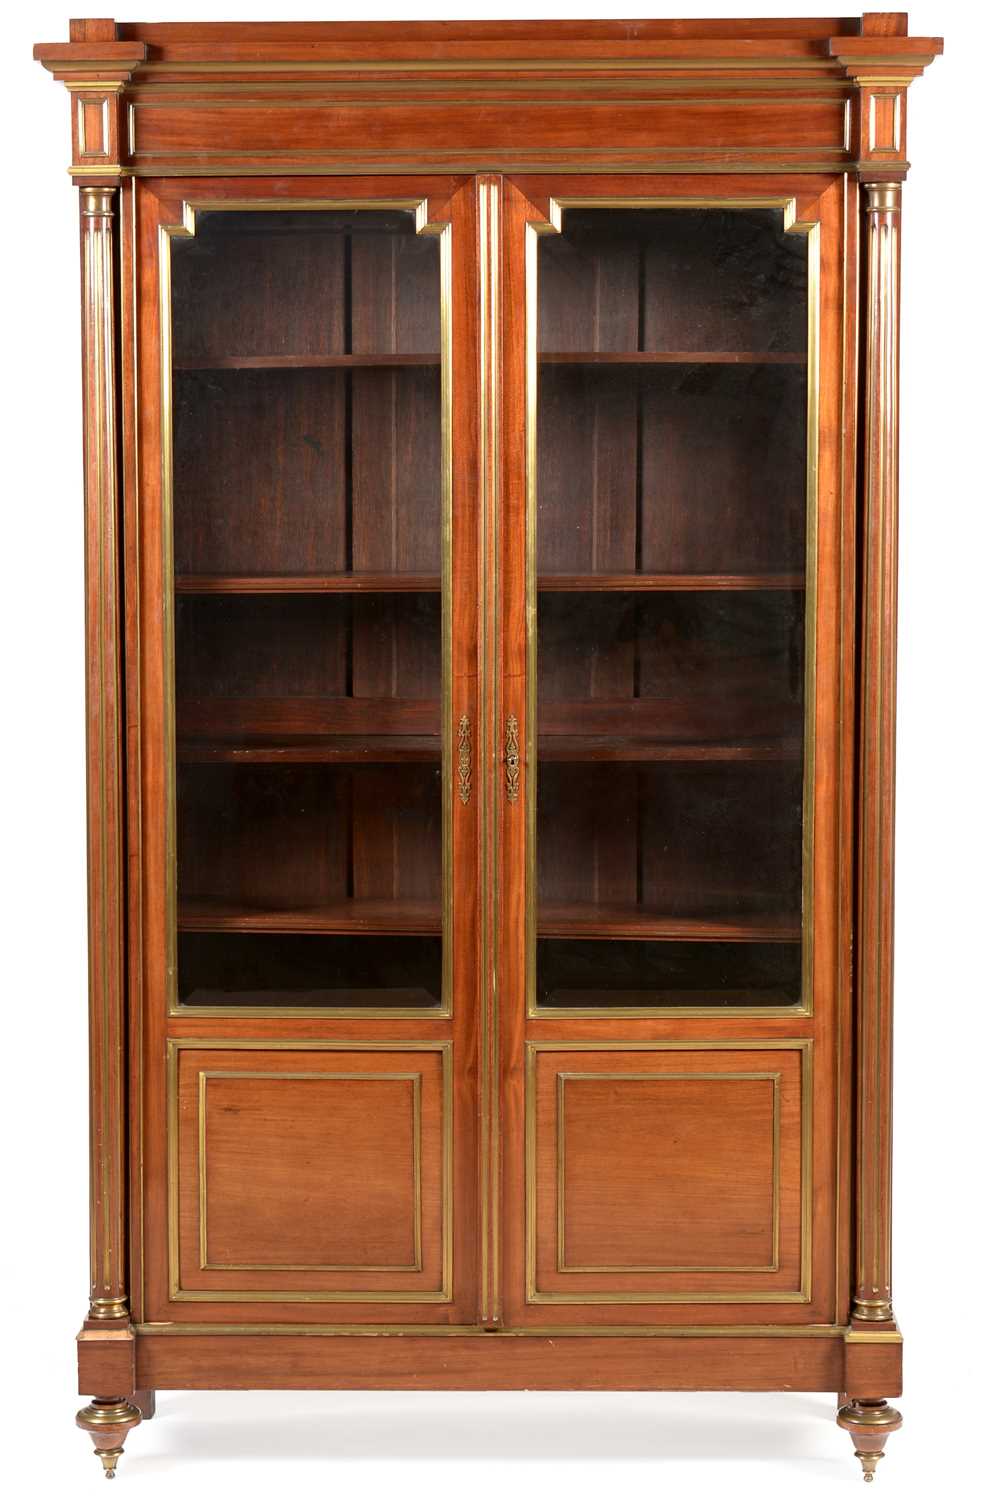 Lot 821 - Late 19th Century French Directoire style breakfront bookcase